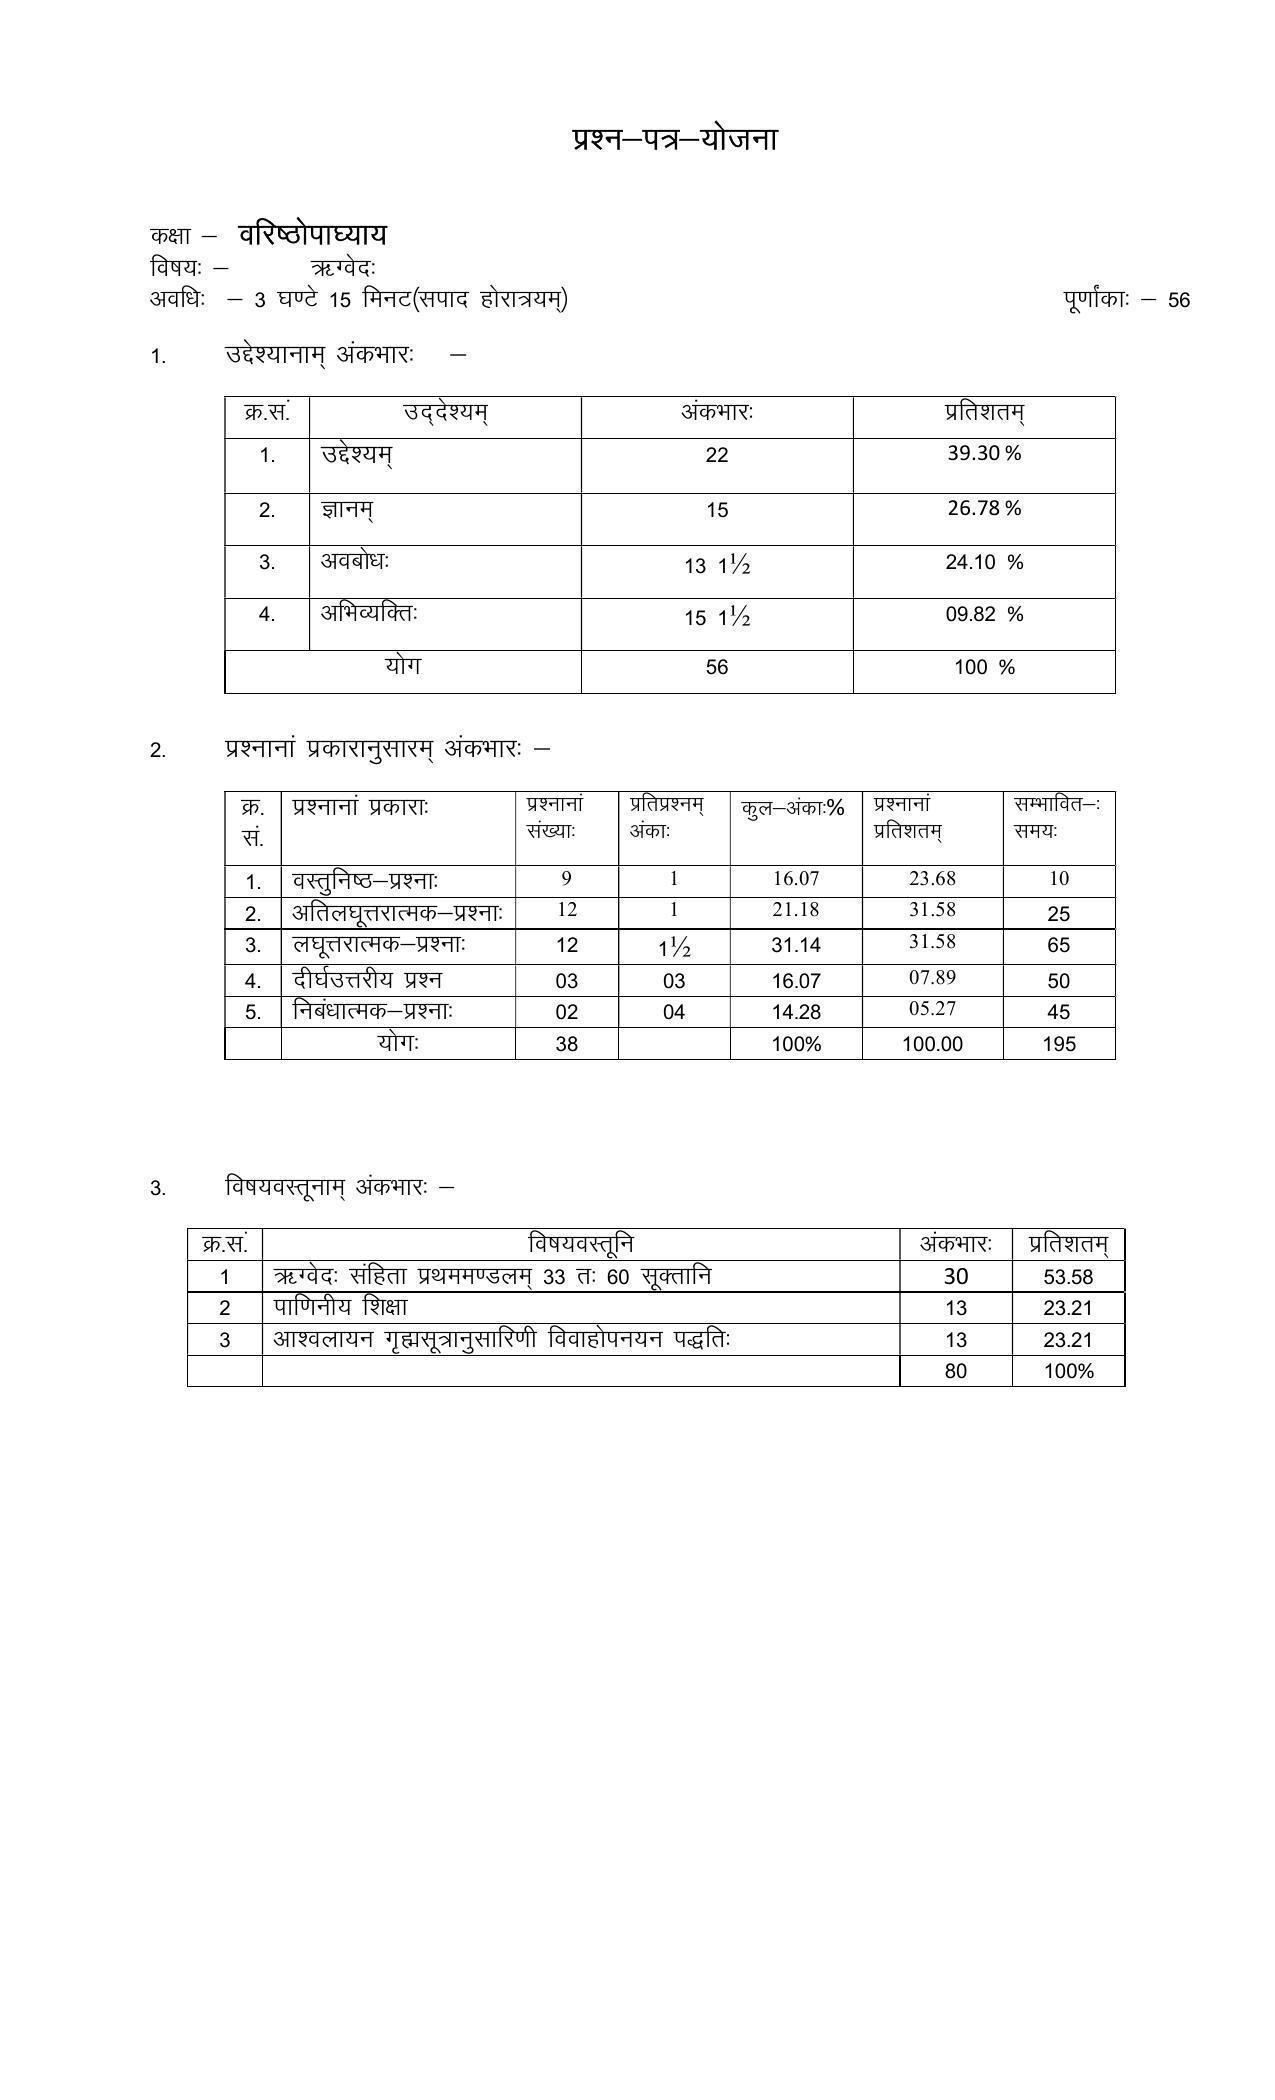 RBSE 2023 CLASS 12 RIGVED Paper - Page 3